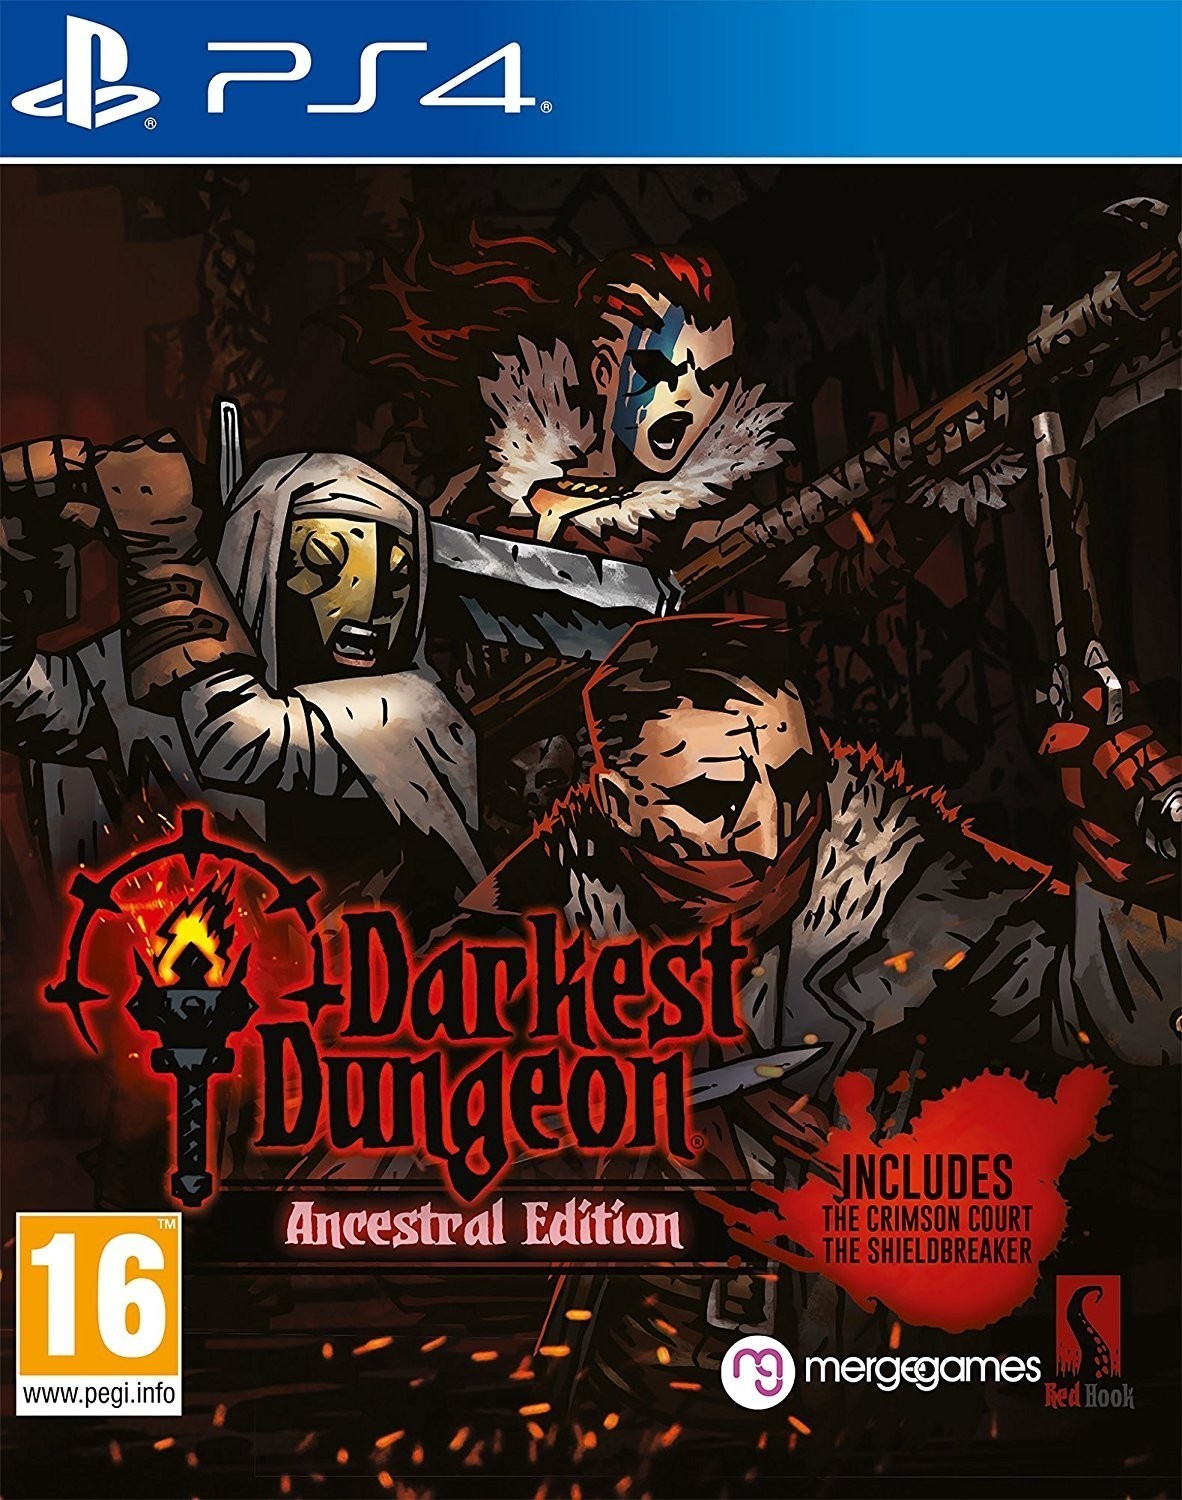 Darkest Dungeon: Ancestral Edition (PS4), Red Hook Studios, Stuart Chatwood